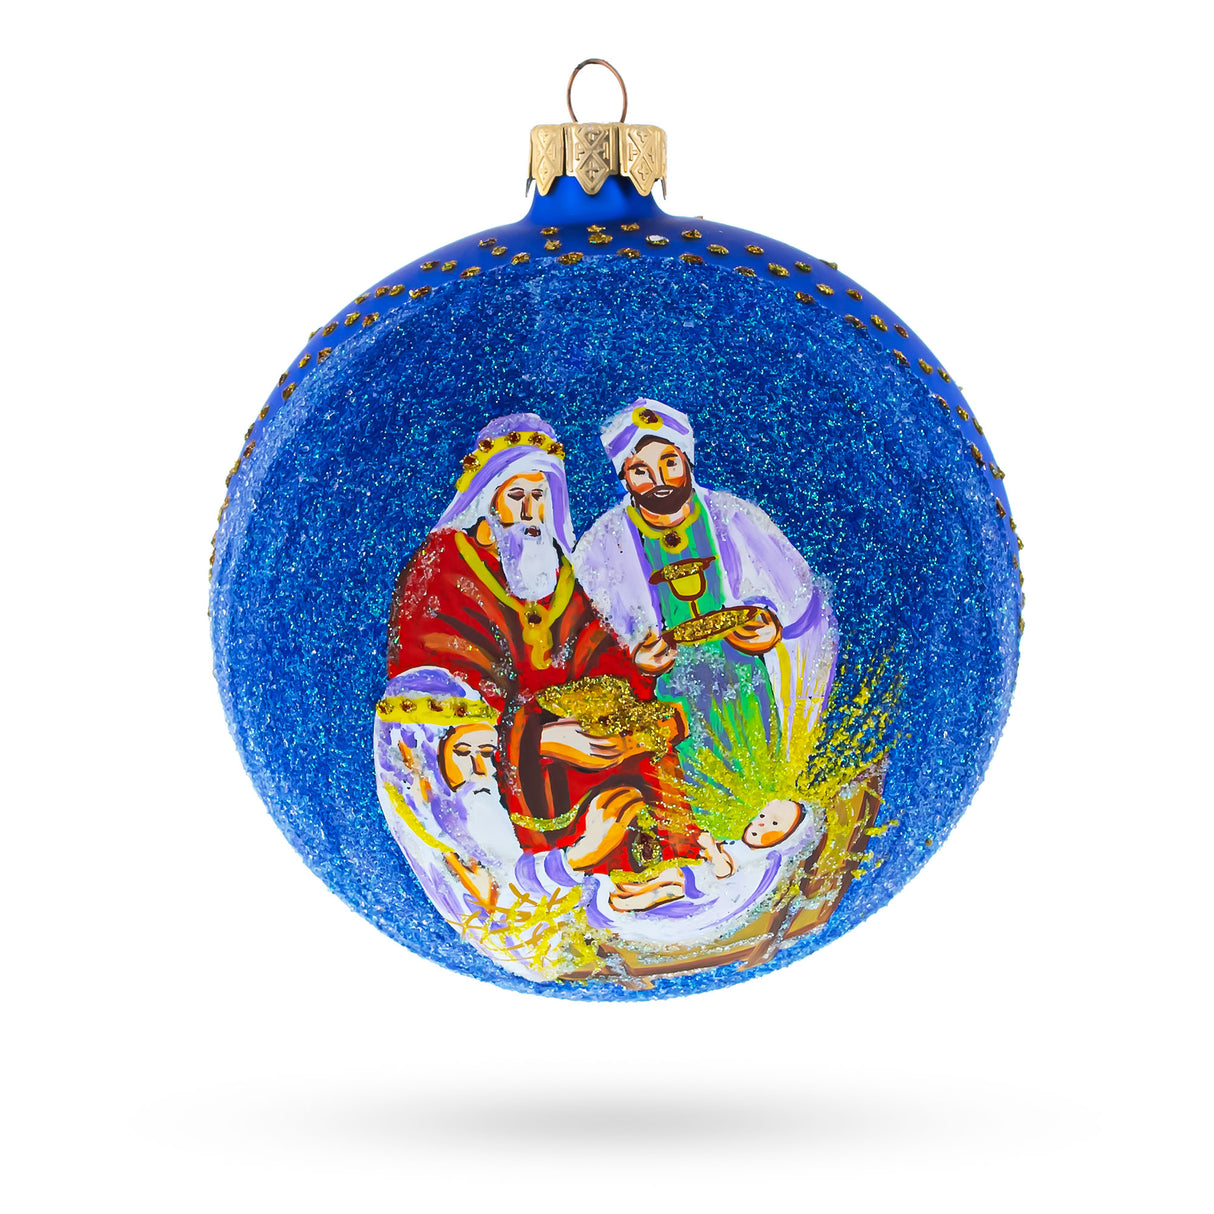 Glass The Wise Men's' Gifts Glass Ball Nativity Christmas Ornament 4 Inches in Blue color Round